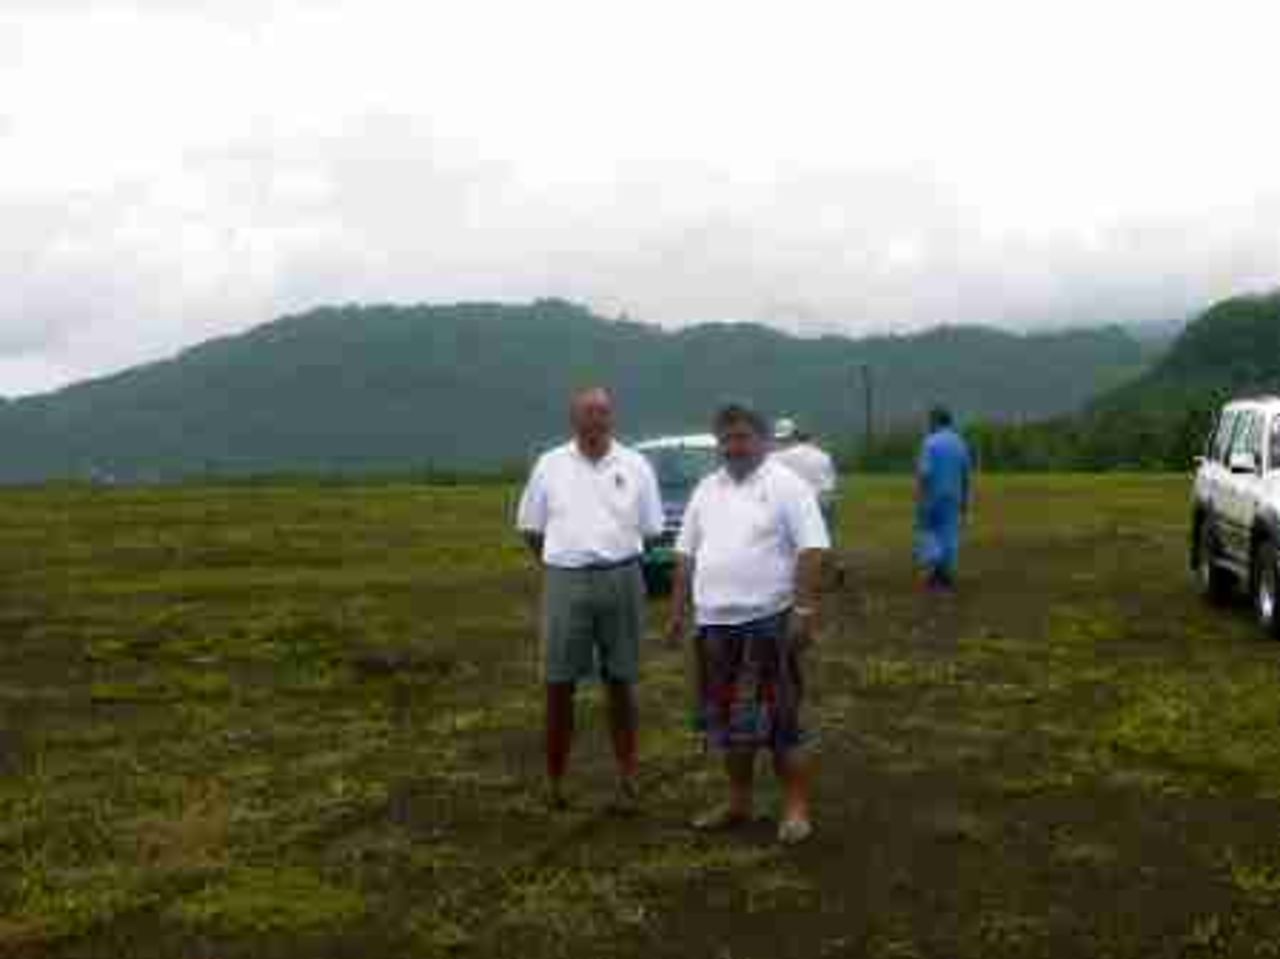 Seb Kohlhase with the Prime Minister of Samoa at the site for the new cricket fields